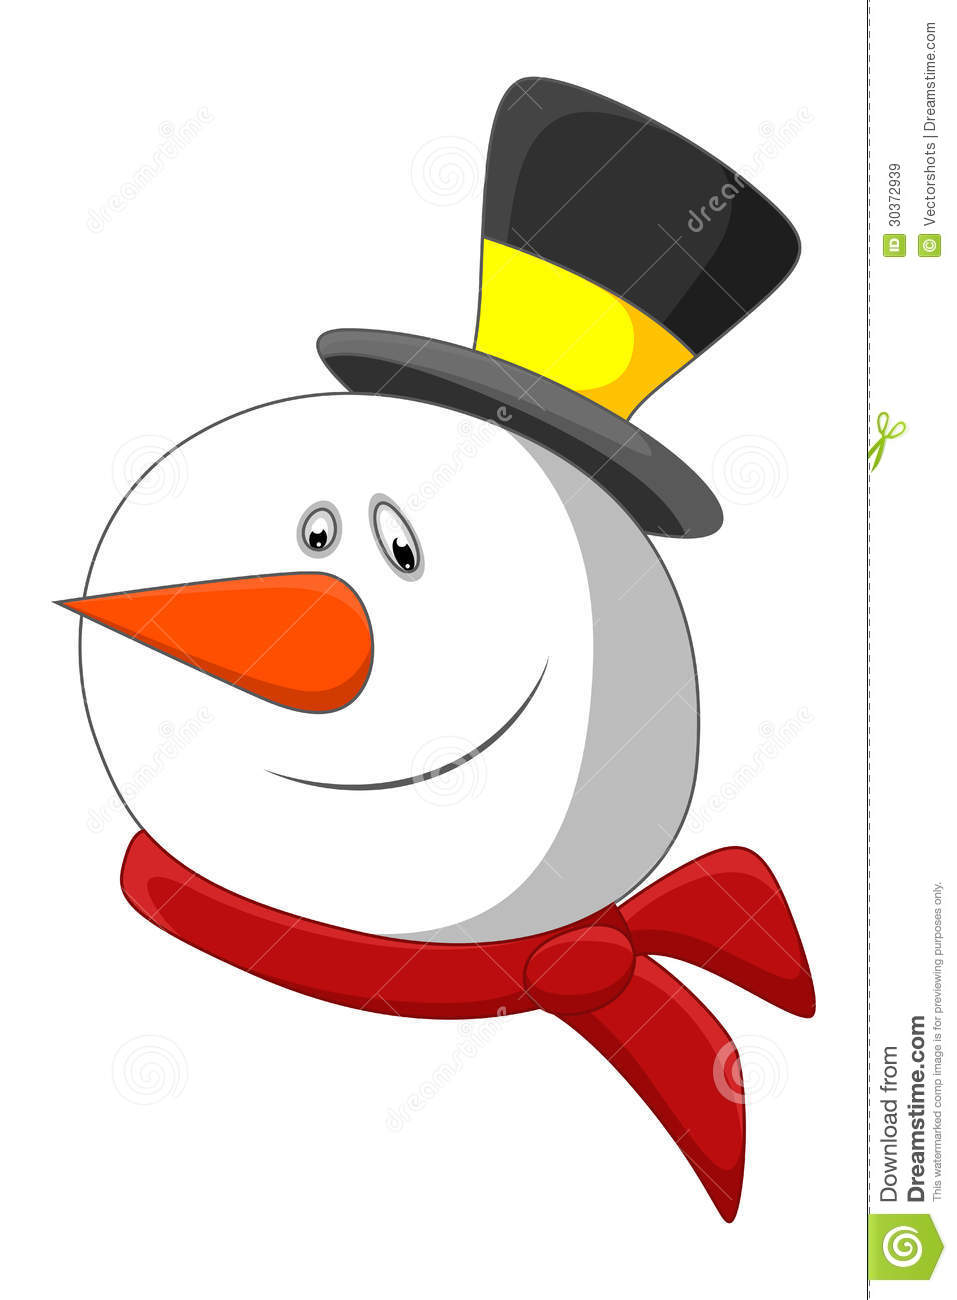 Drawing Art Of Cute Snowman Character Face Vector Illustration